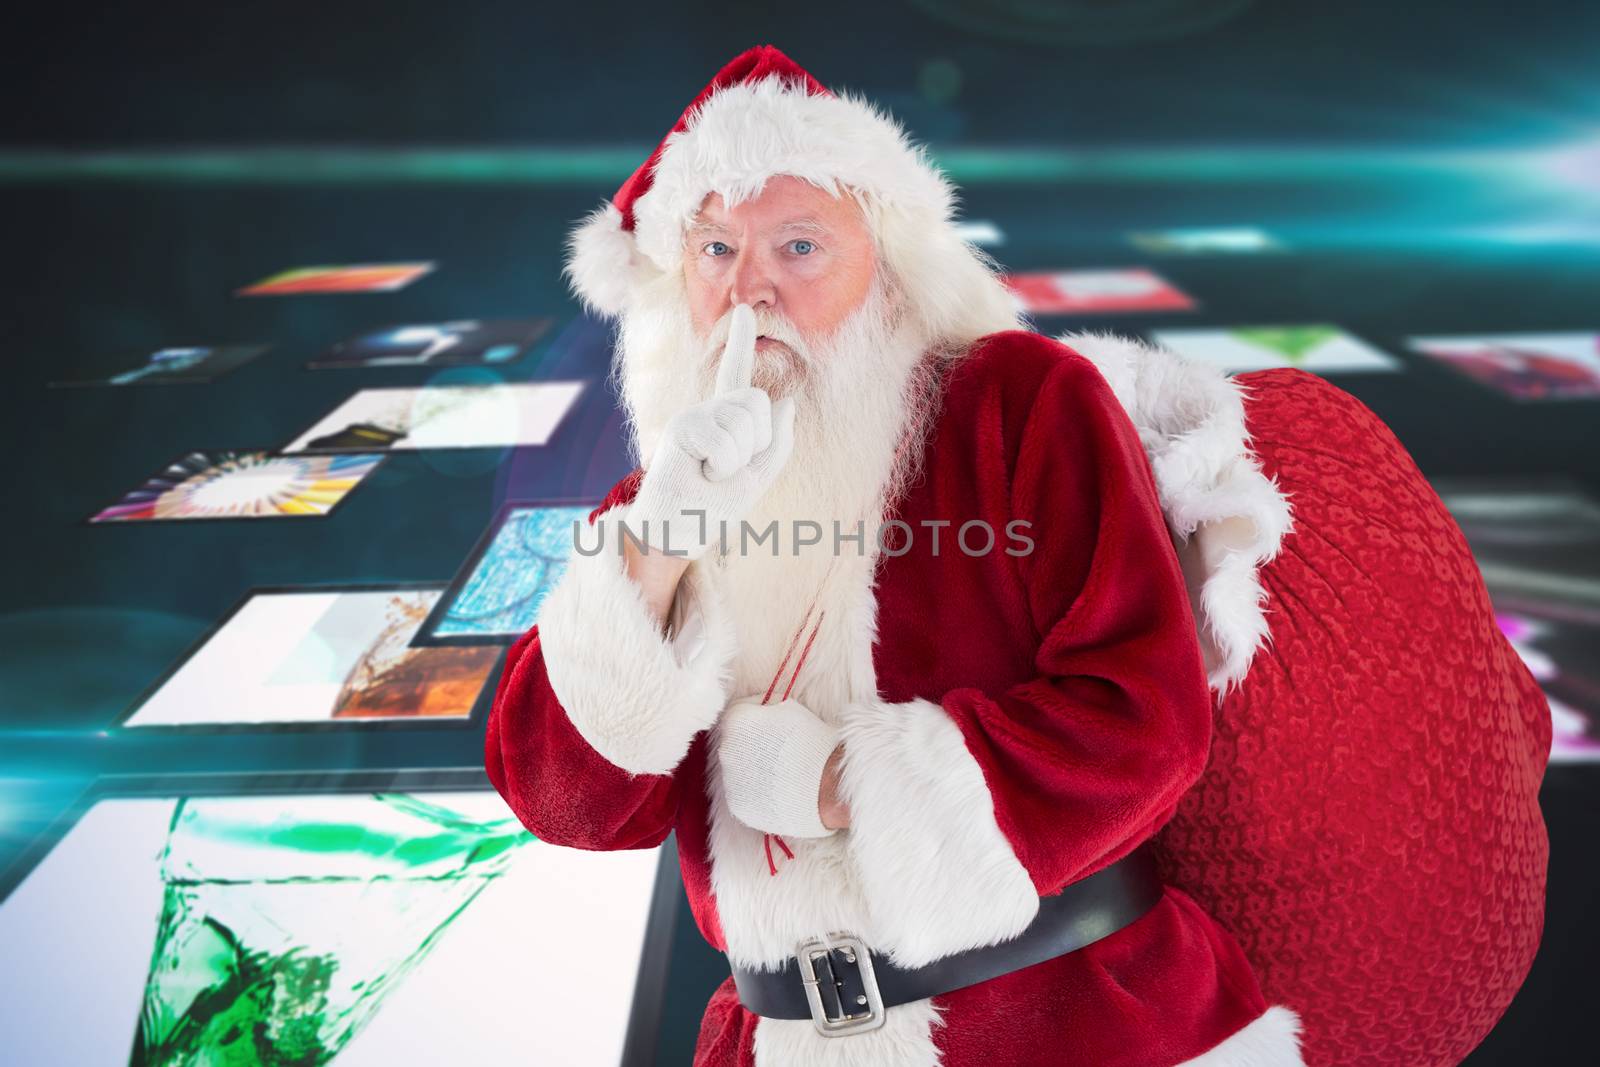 Santa asking for quiet with bag against screen collage showing lifestyle images